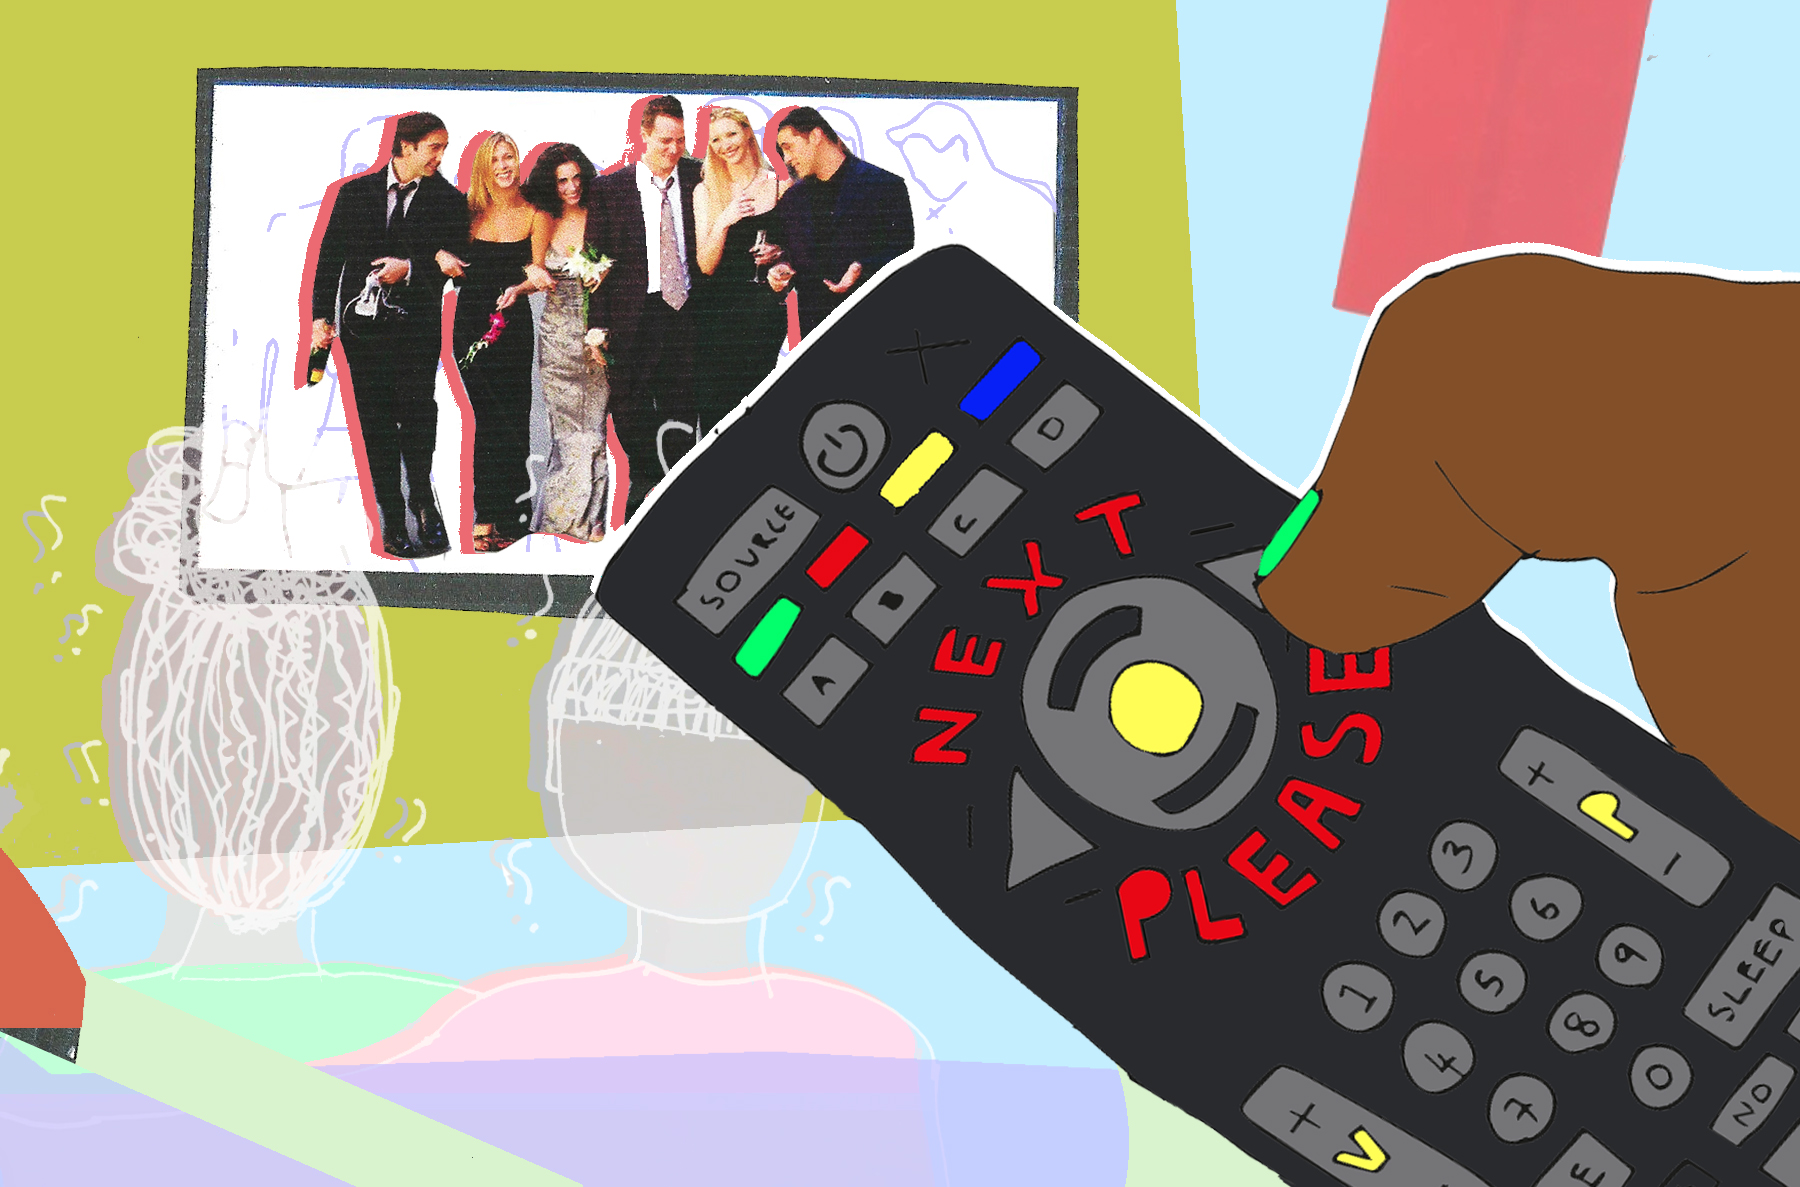 Friends nostalgia broke Instagram, but is it time to say goodbye to outdated TV?